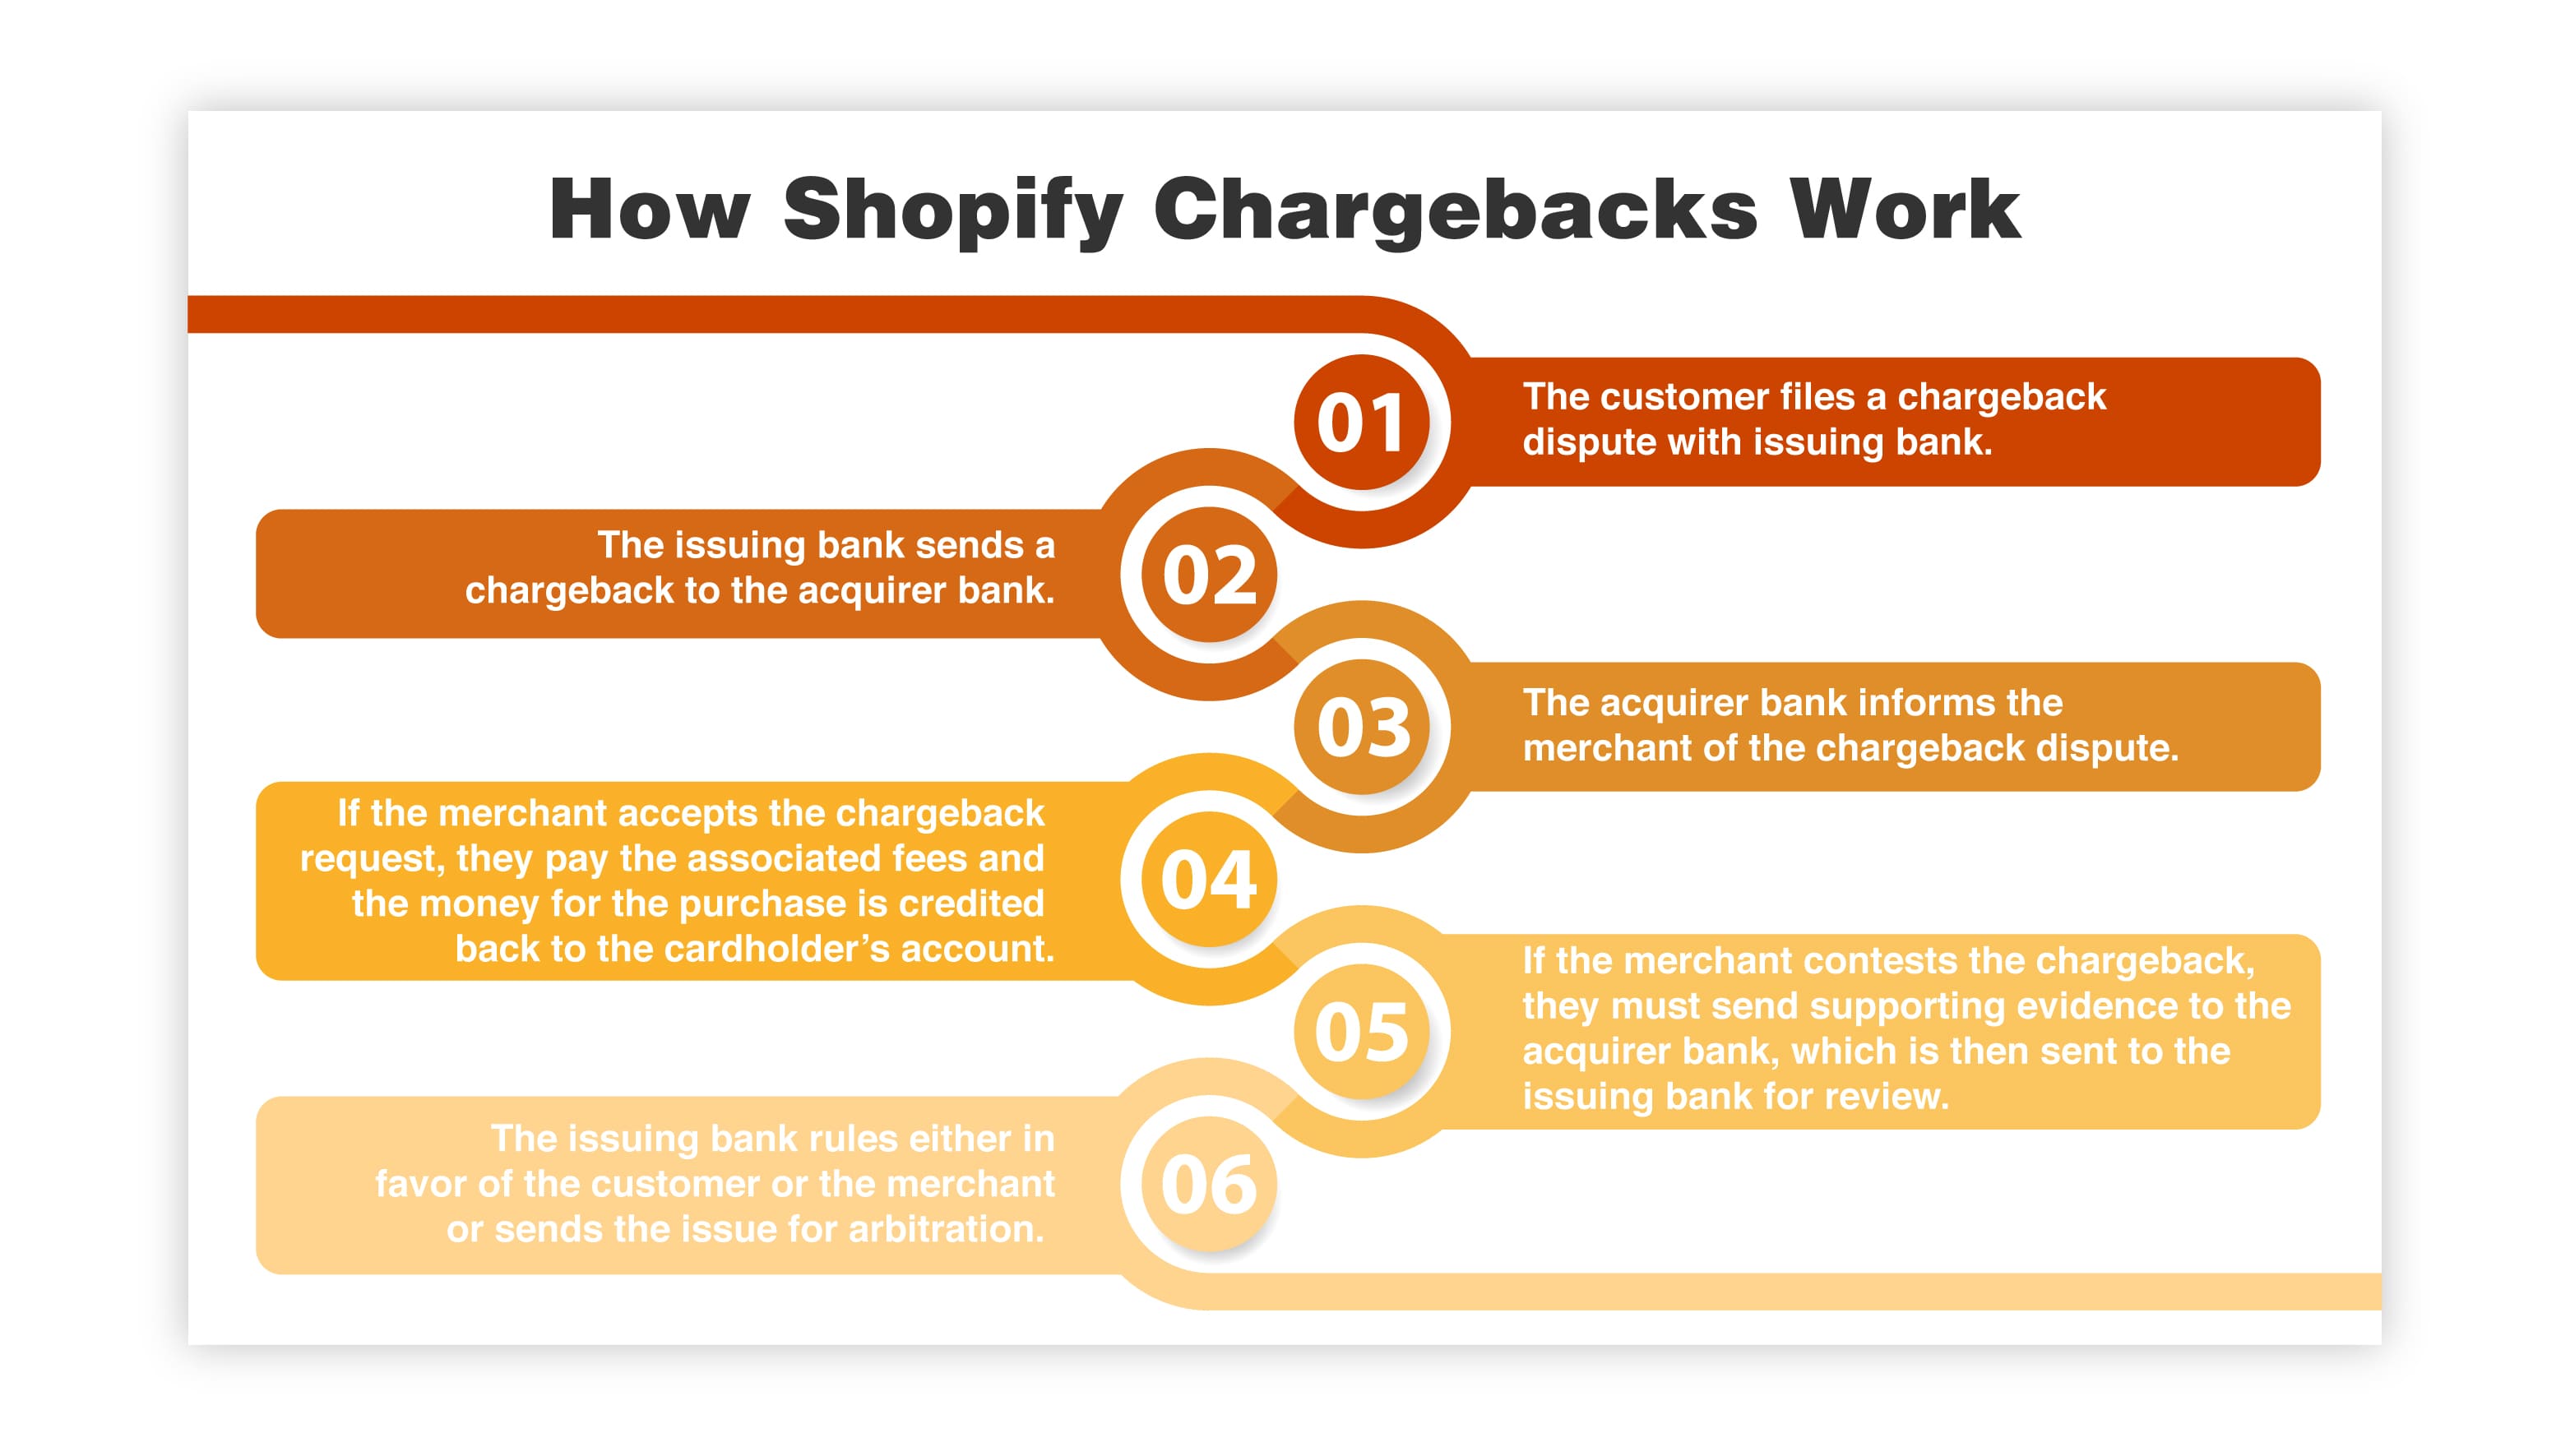 How Shopify Chargebacks Work